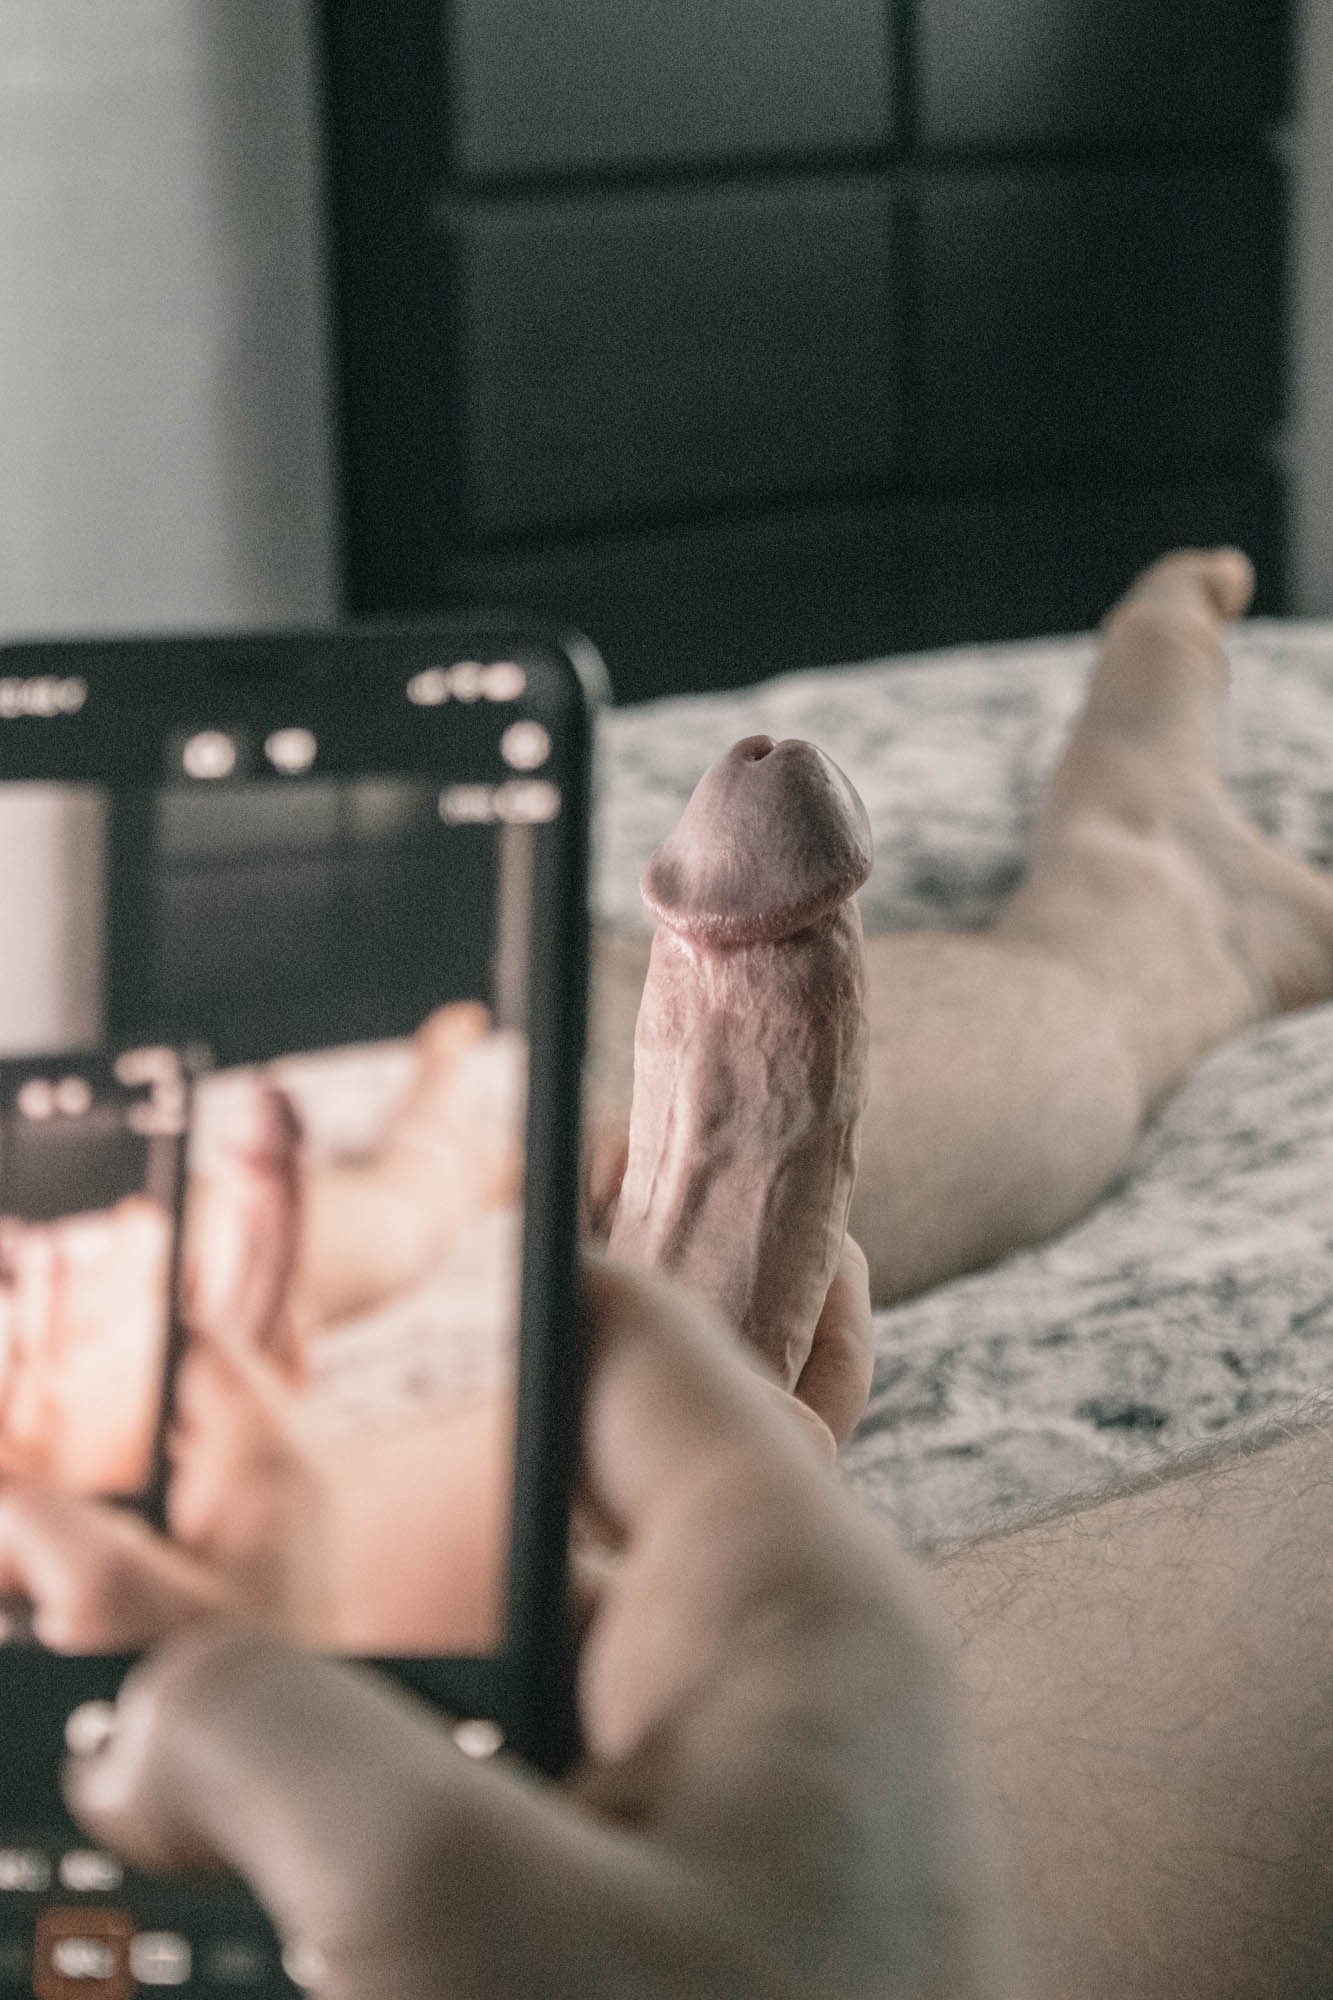 Watch the Photo by fukrme with the username @fukrme, posted on December 29, 2019. The post is about the topic Cumshot. and the text says 'The art of dick pics, and when you edge just a bit too much..'